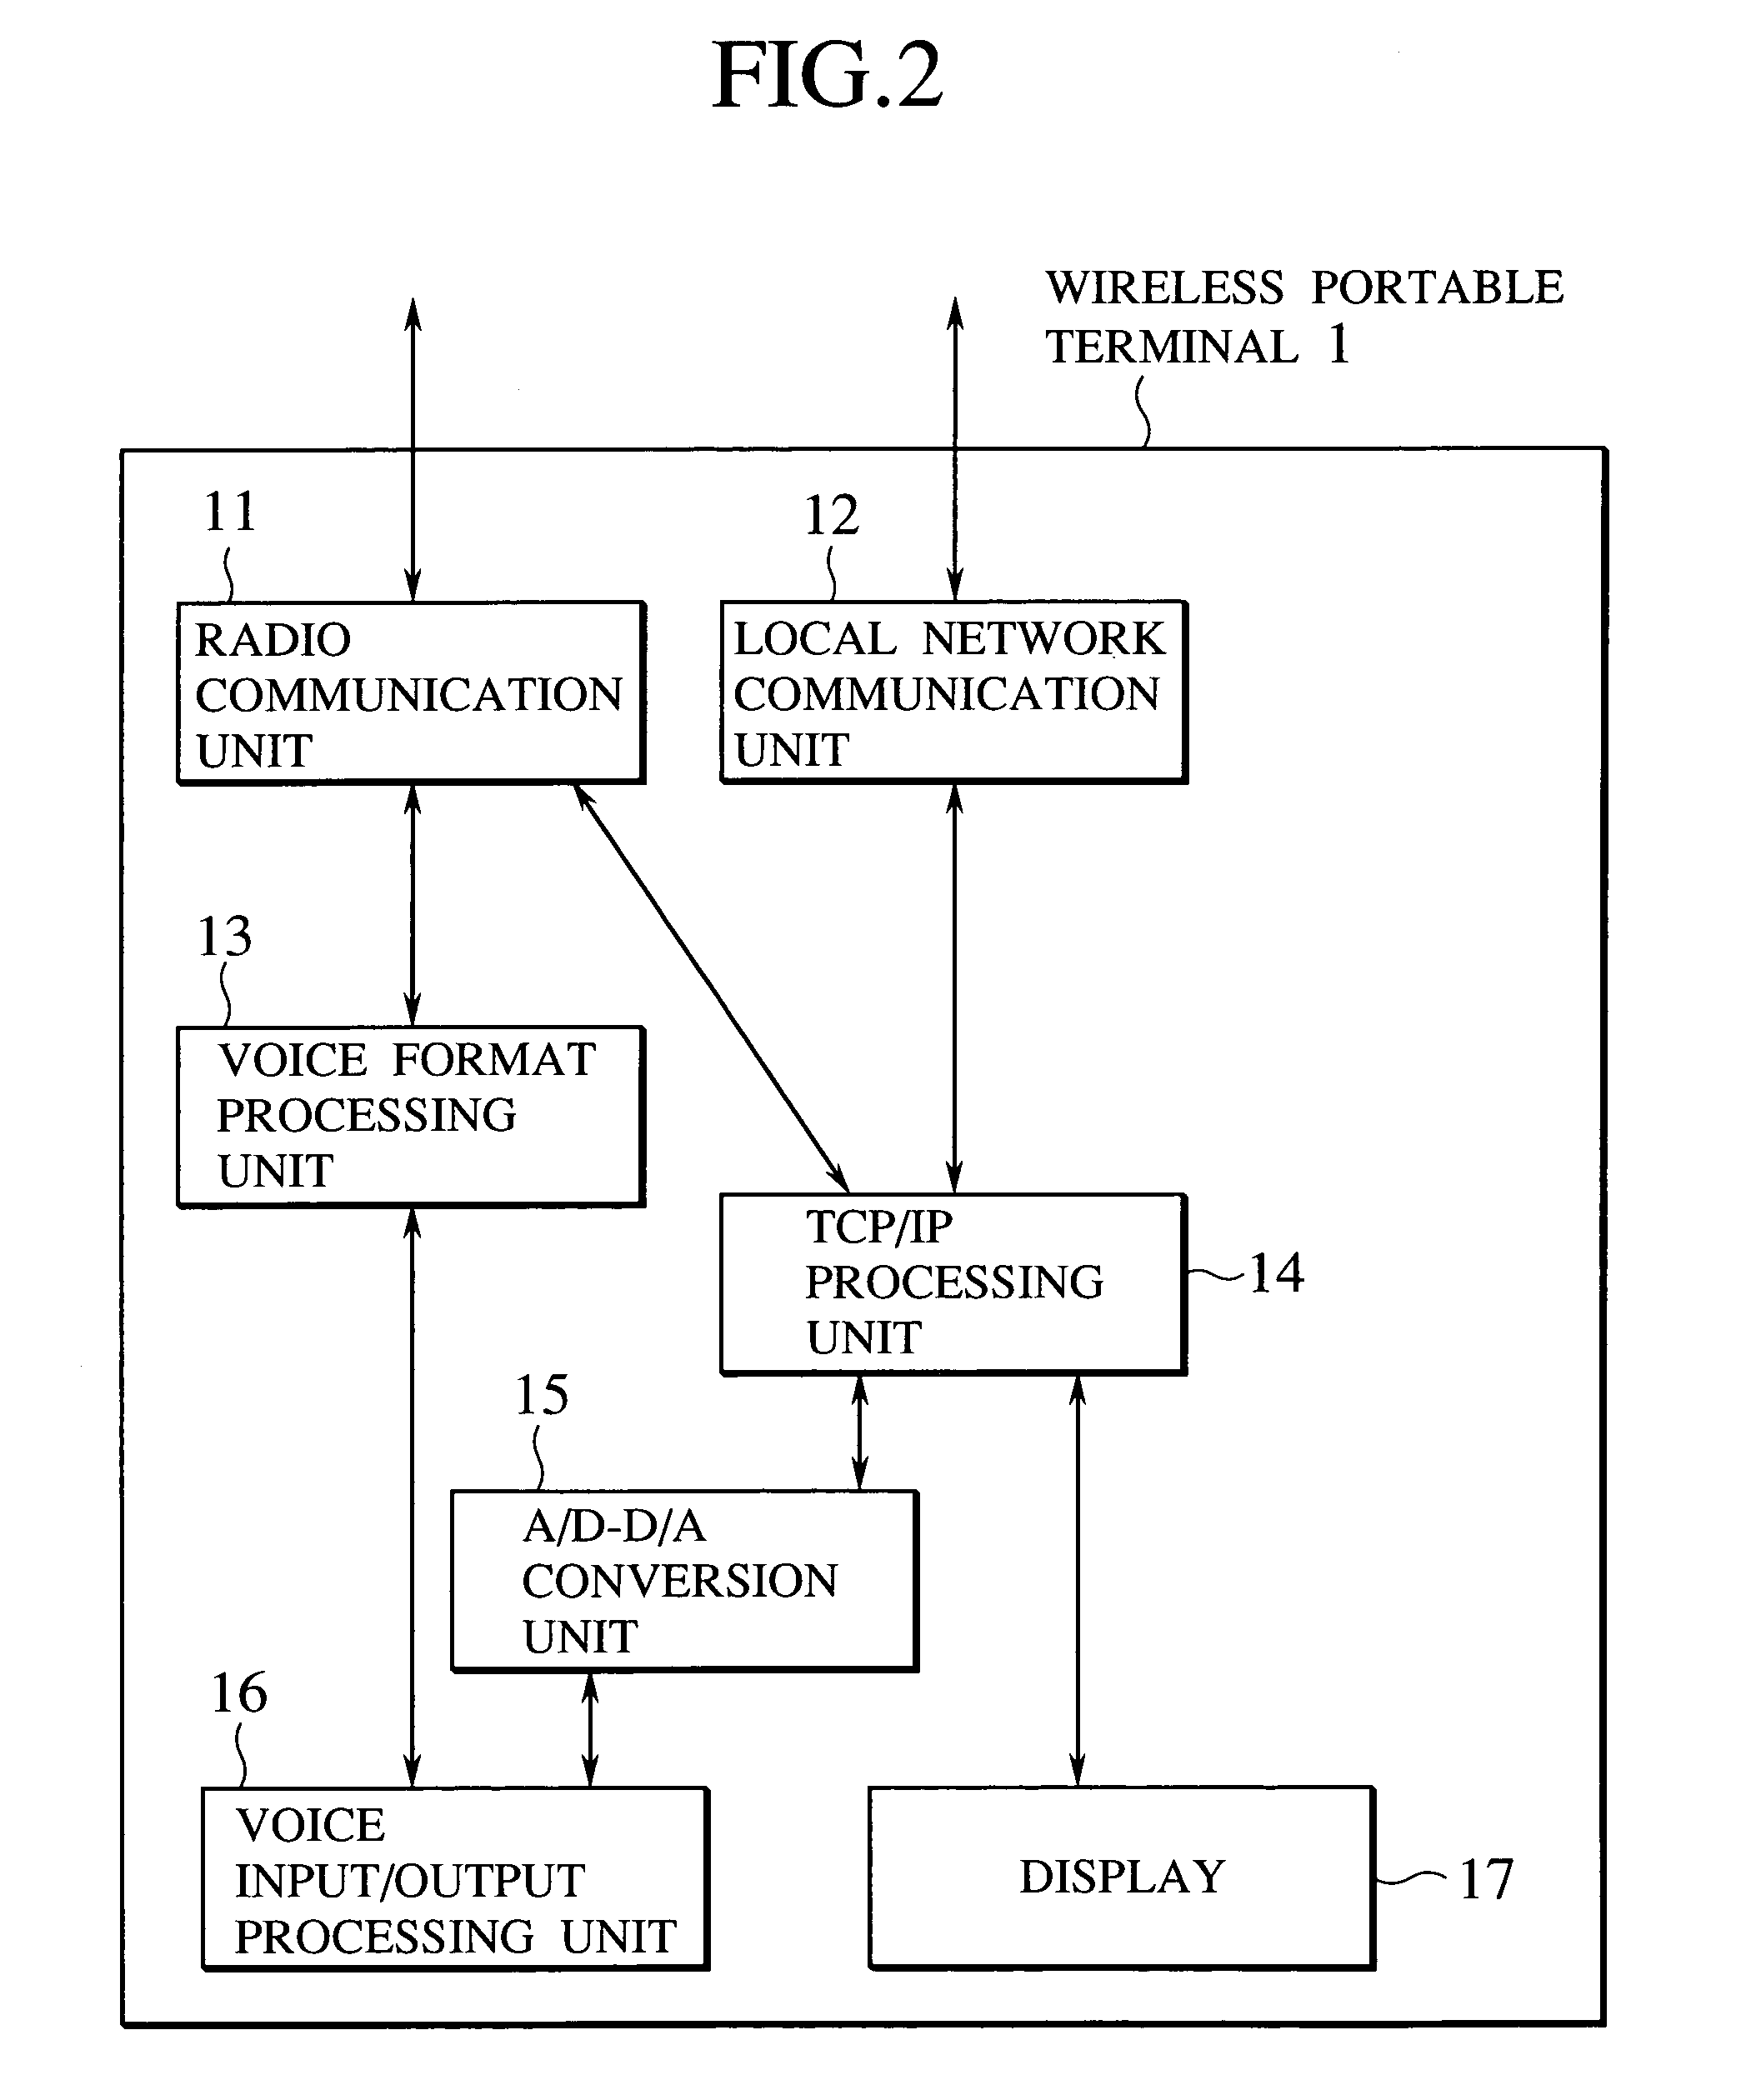 Communication scheme for realizing effective data input/setup in compact size portable terminal device using locally connected nearby computer device